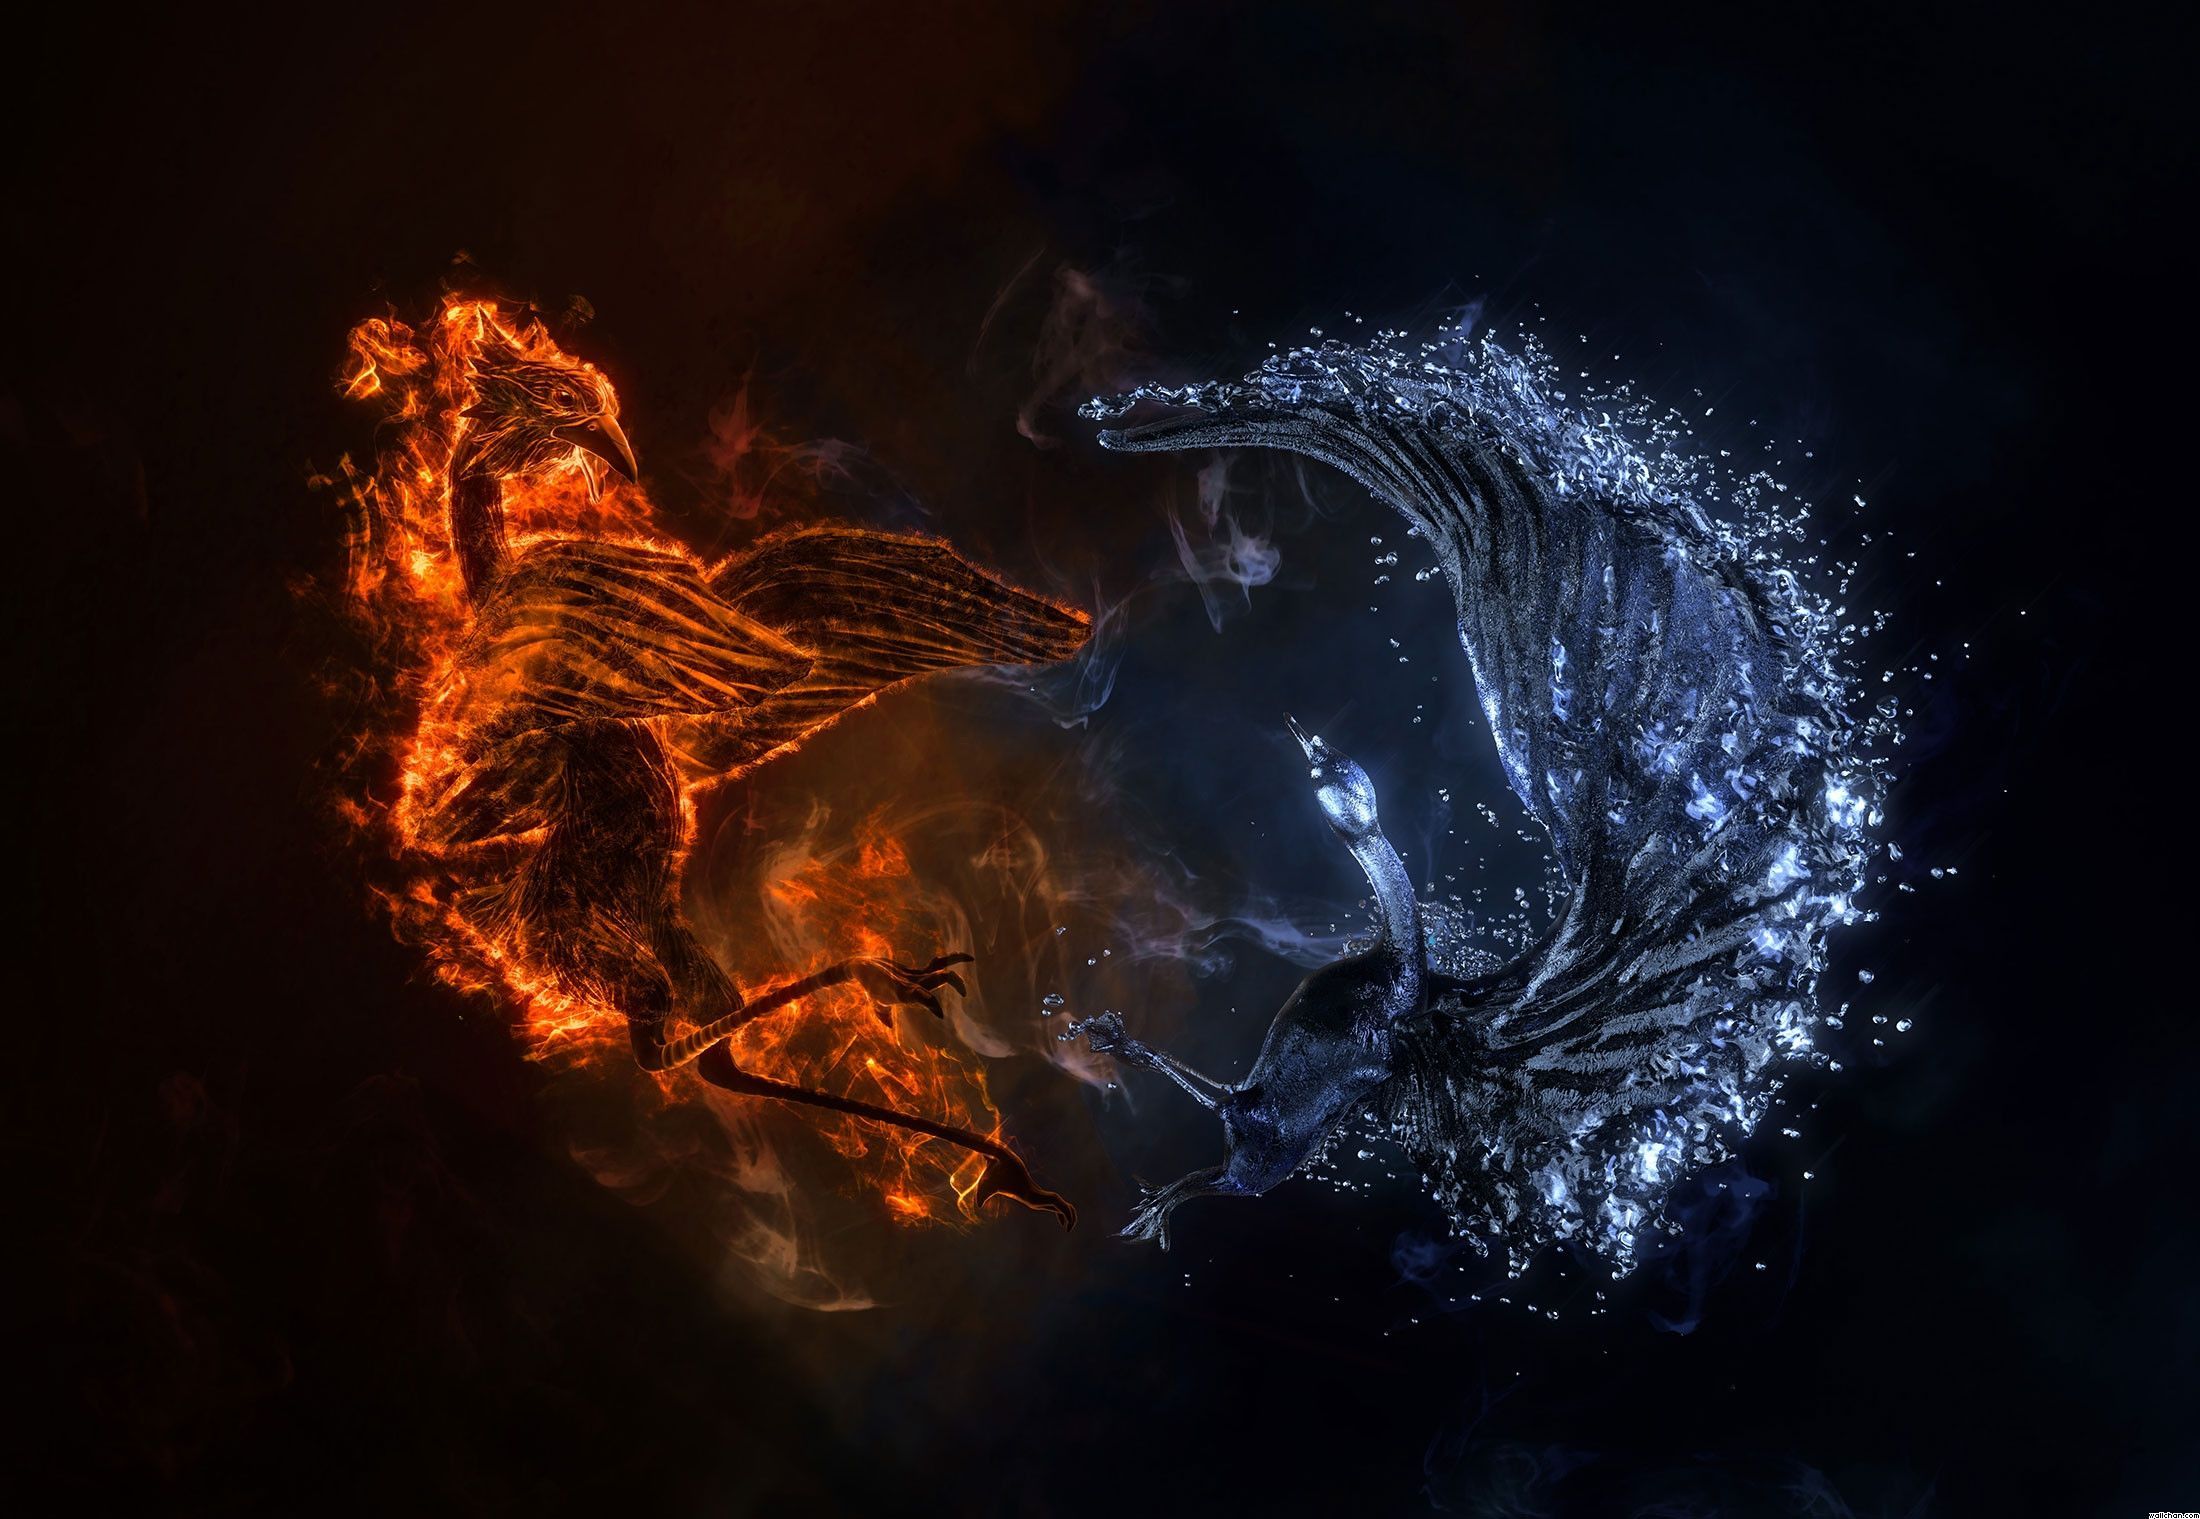 Phoenix Live Images, Hd Wallpapers Bsnscb Graphics - Fire And Water Unicorn - HD Wallpaper 